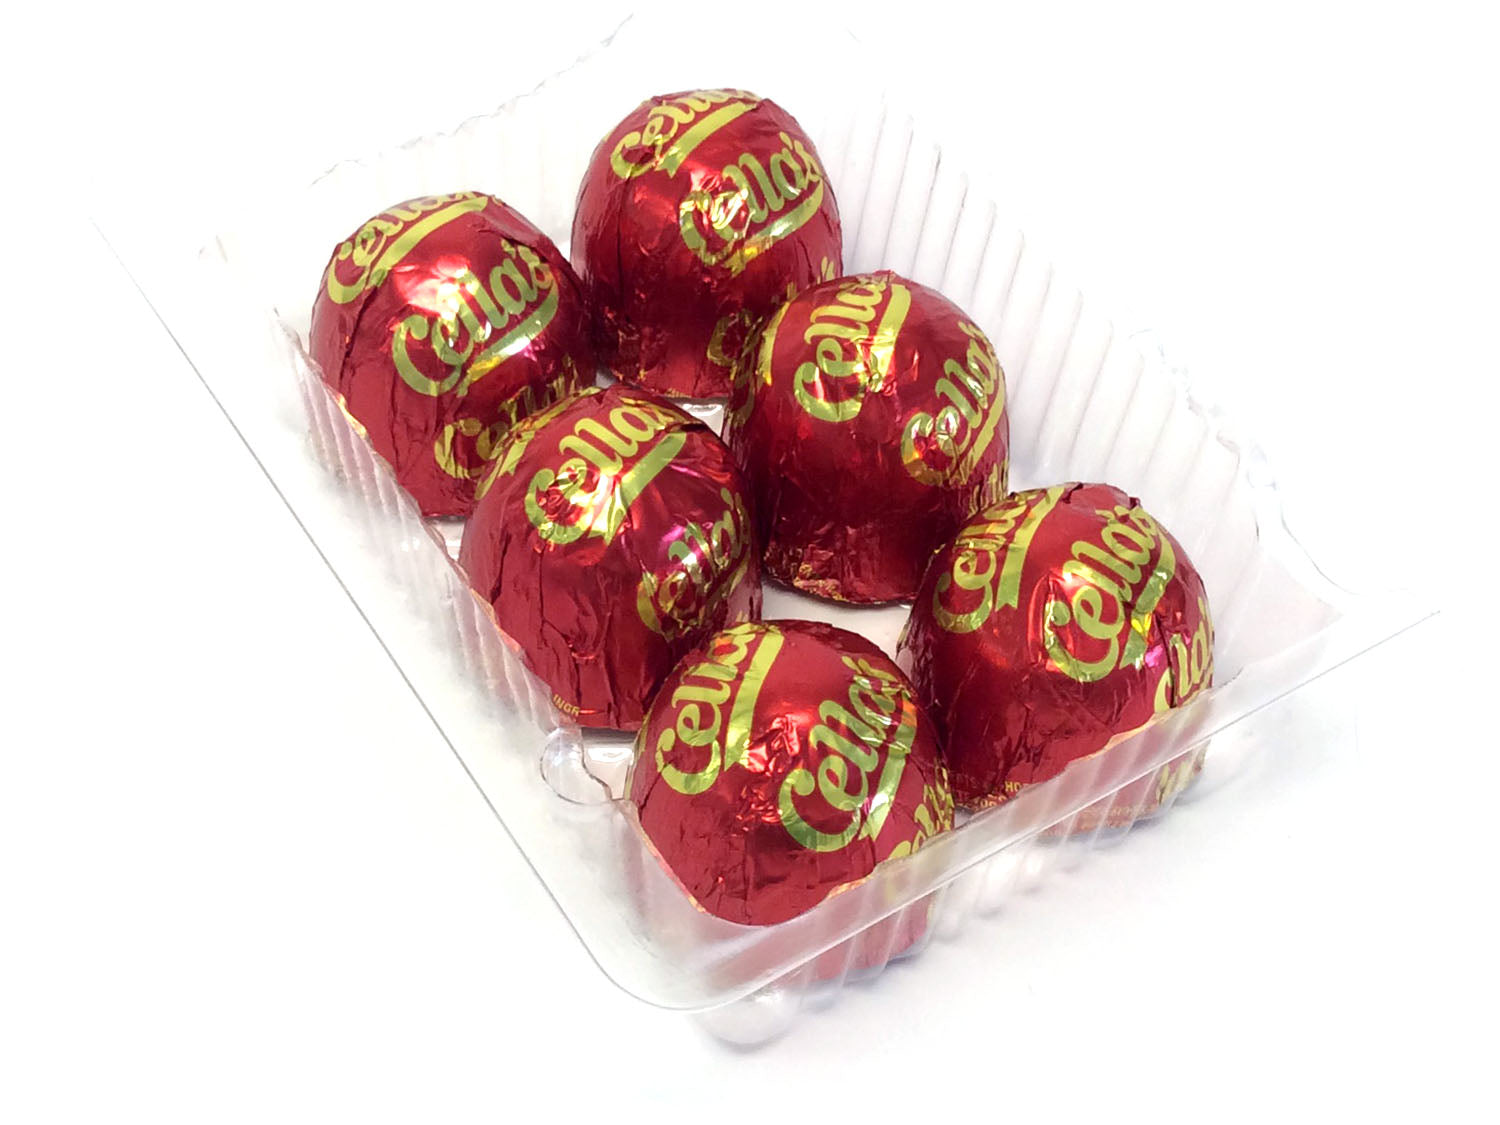 Cella's Milk Chocolate Covered Cherries - 3 oz bag unwrapped